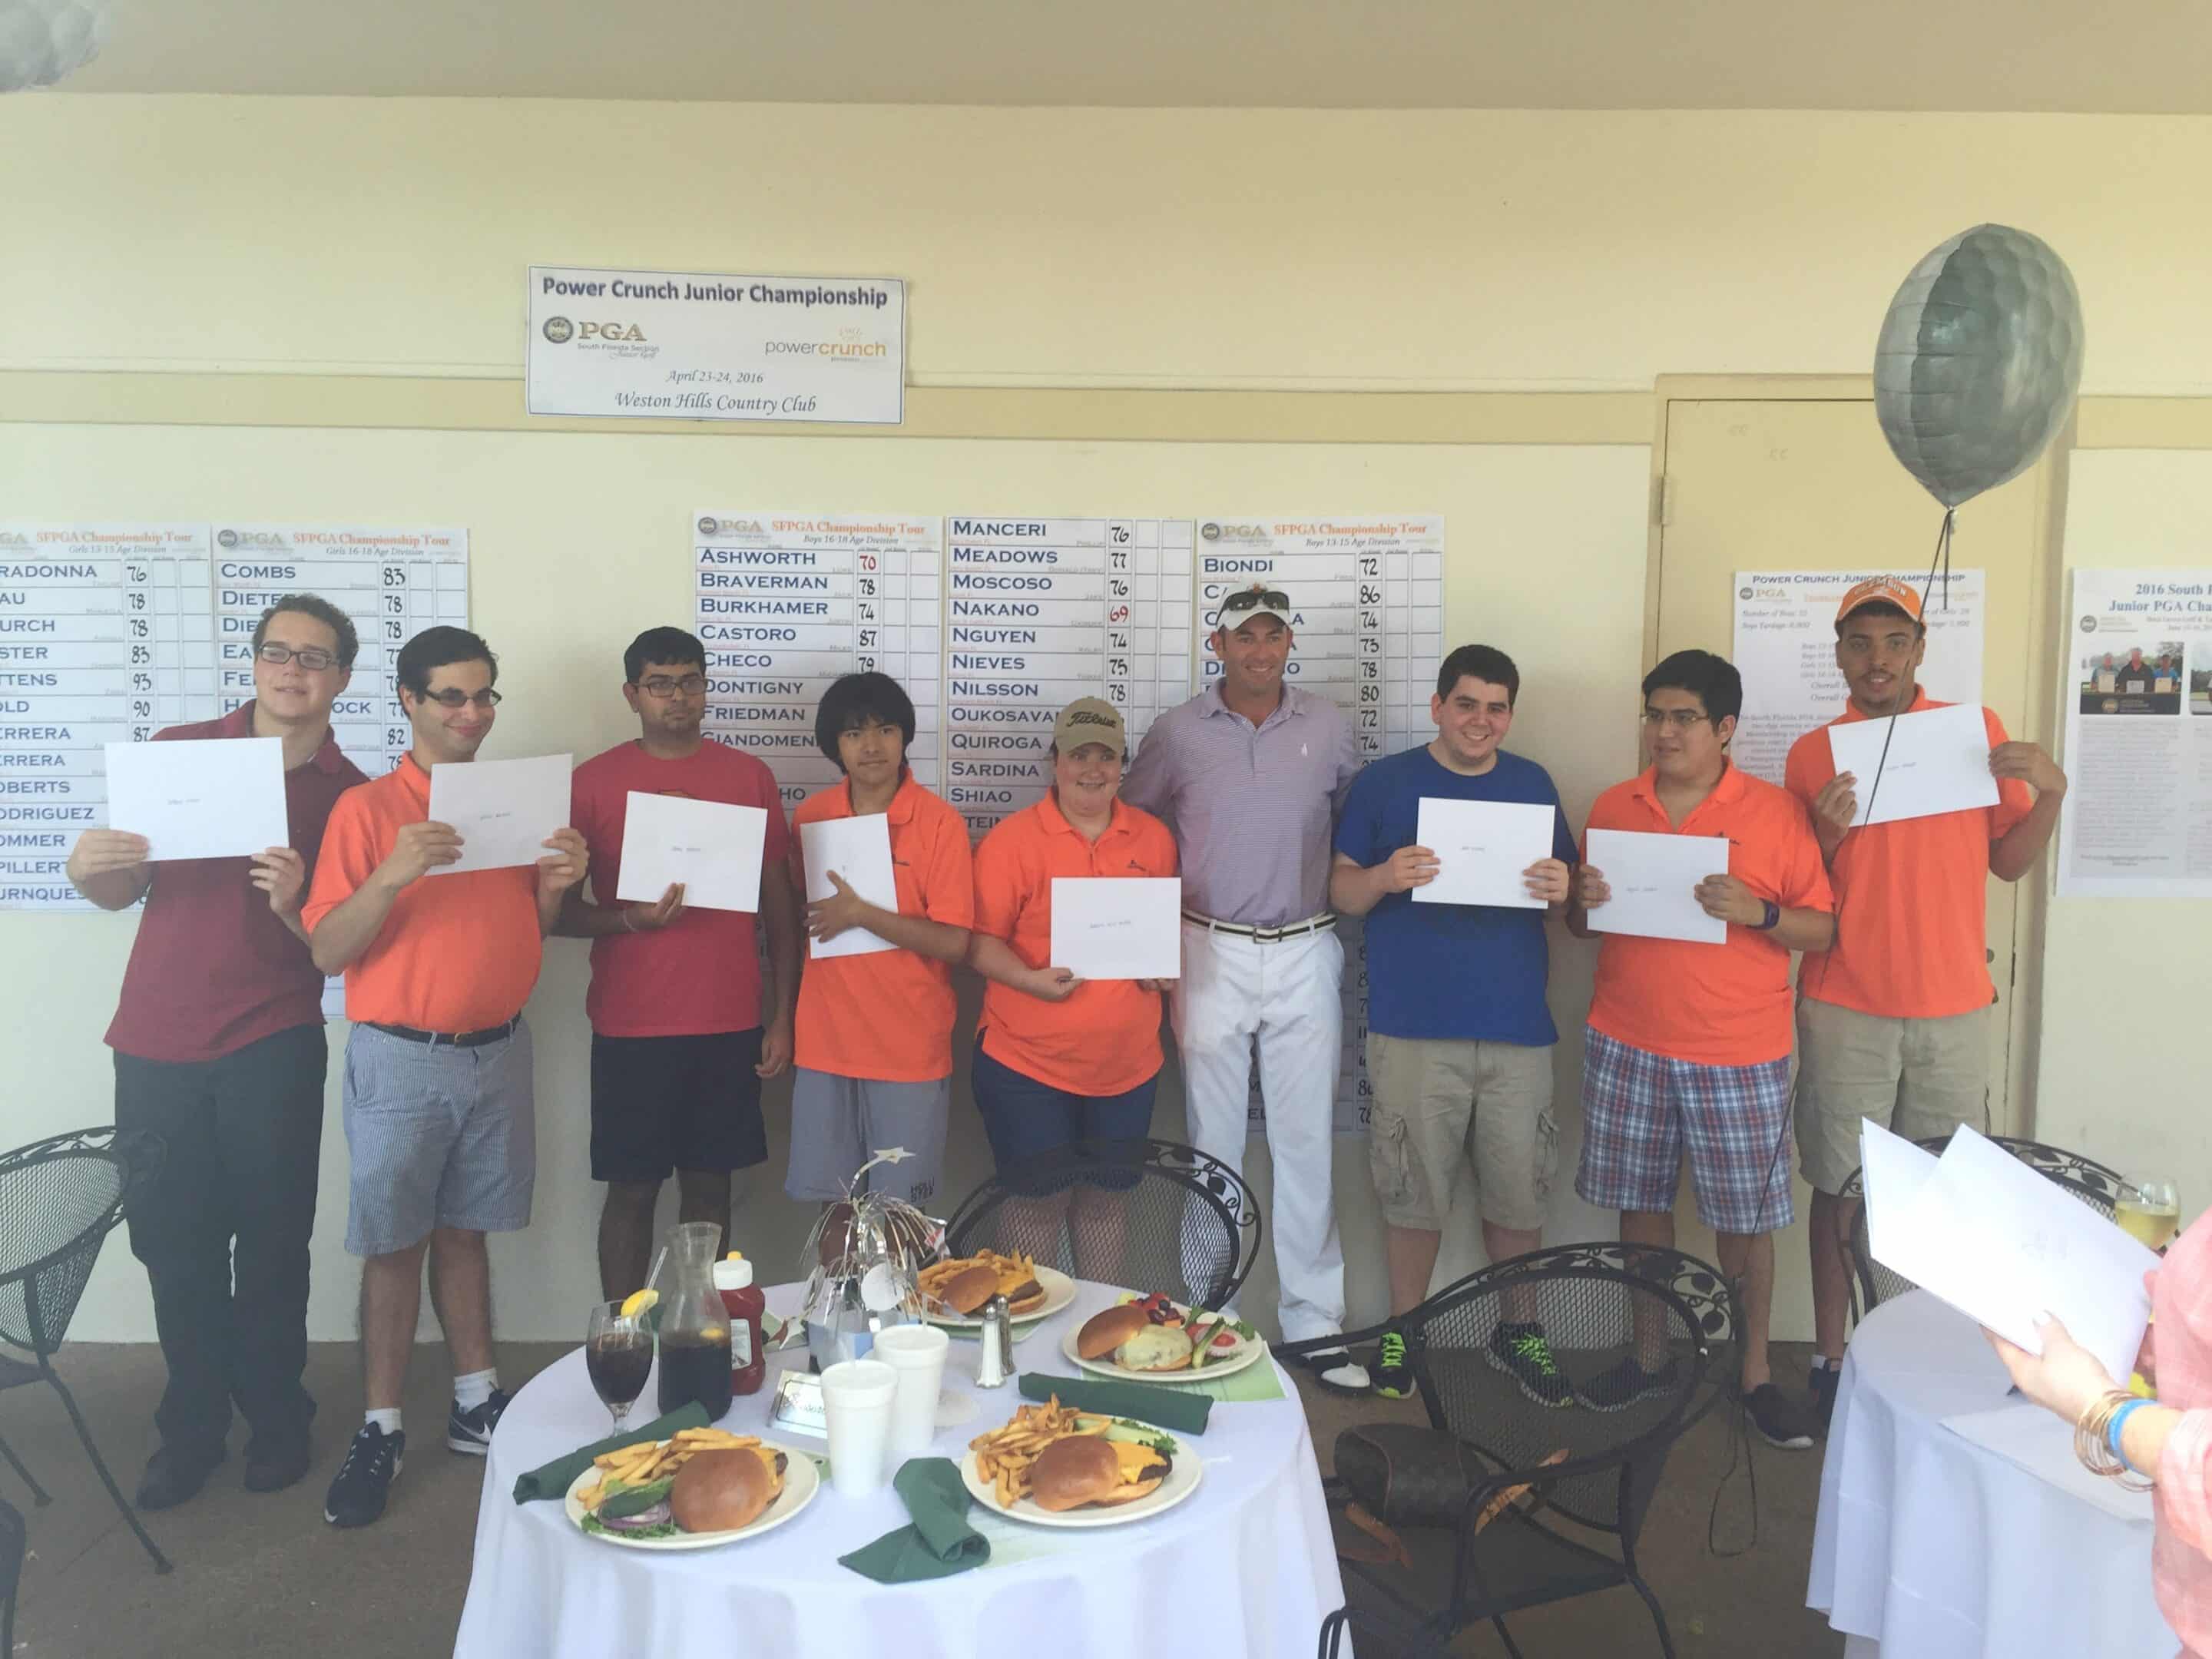 The First Tee End-of-Program Luncheon